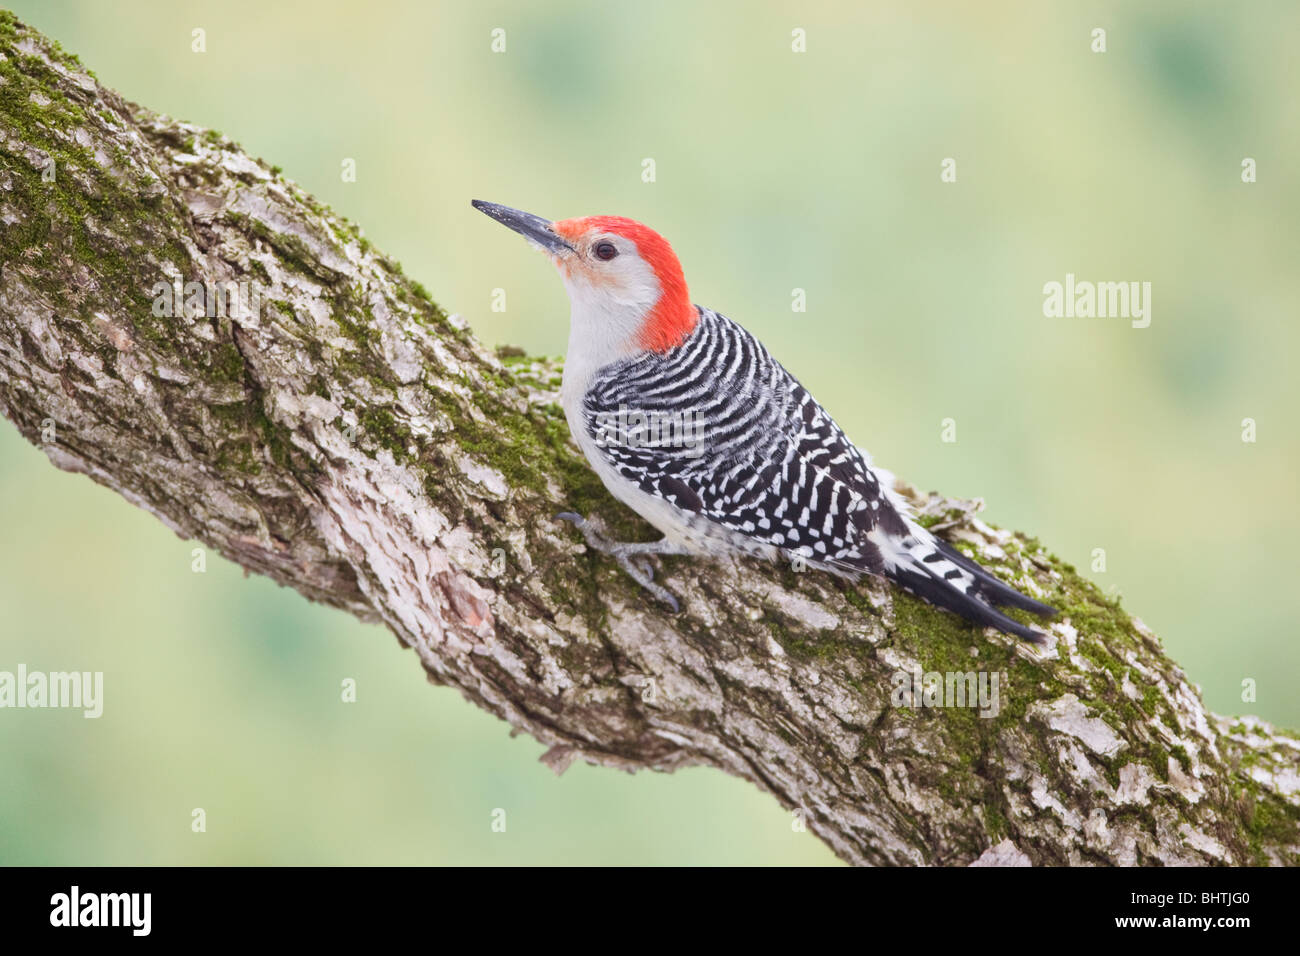 Red-bellied Woodpecker perched on Grape Vine Stock Photo